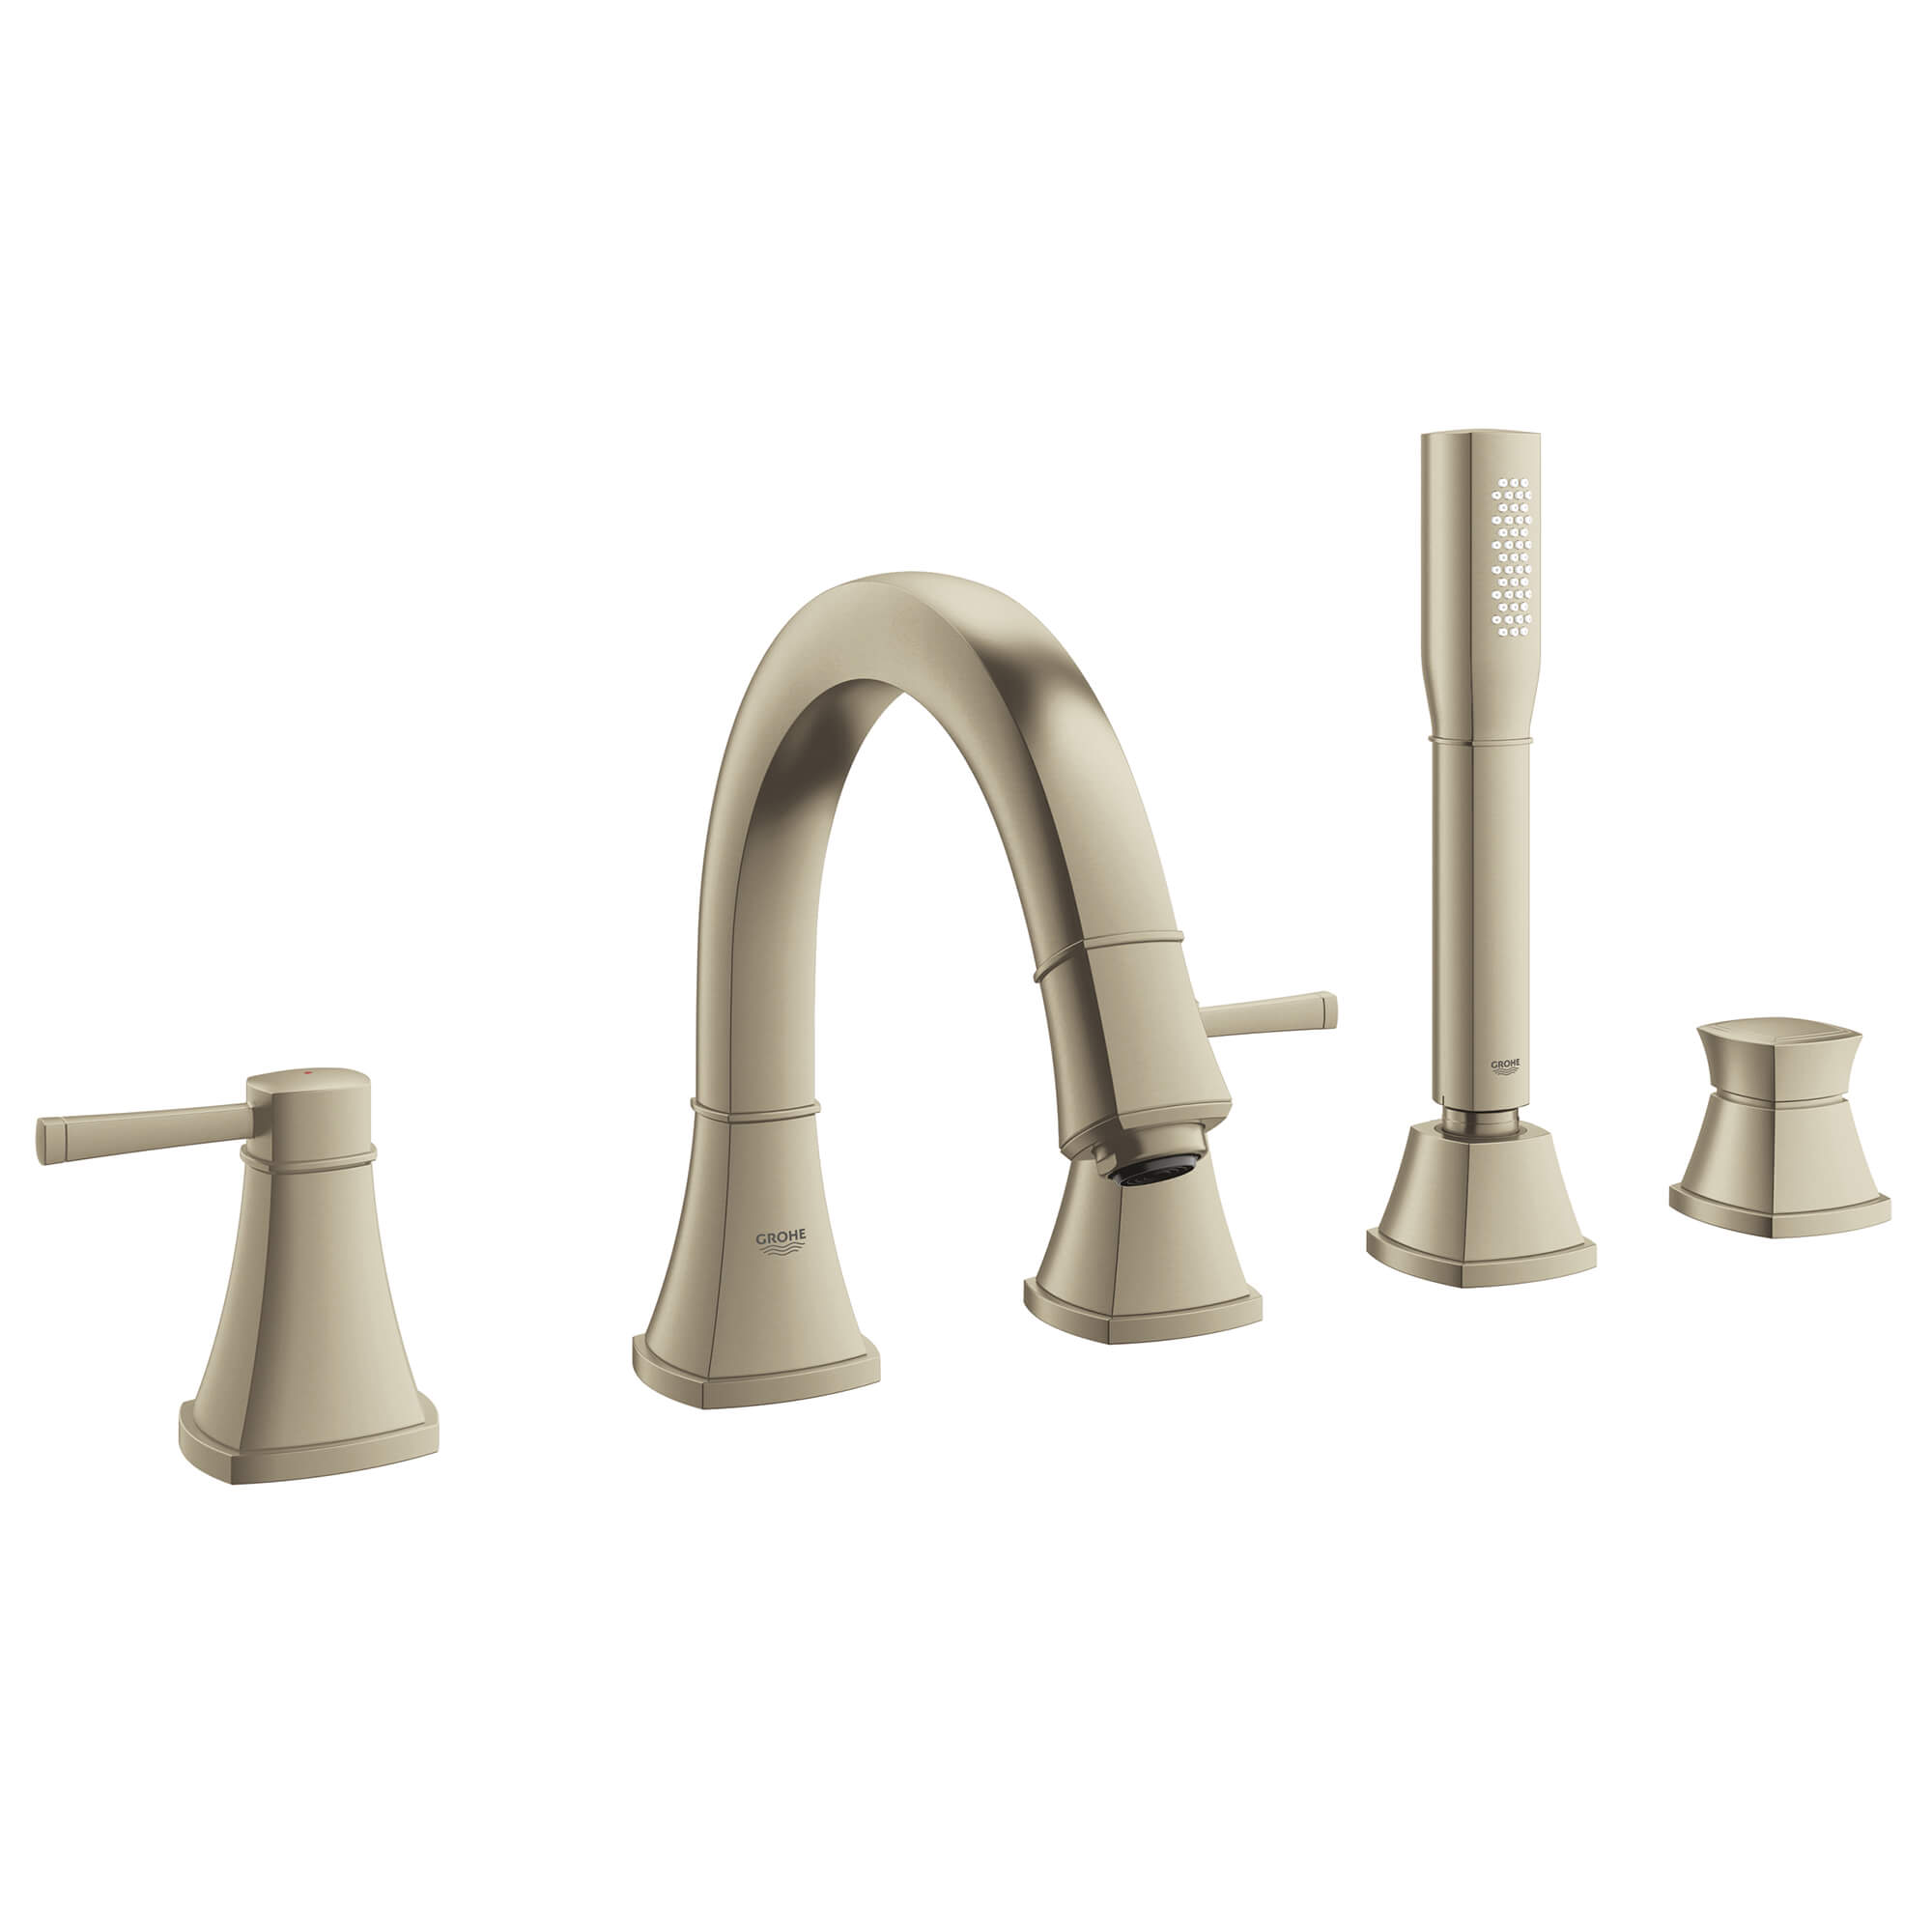 GrohFlex Roman Tub Filler With Personal Hand Shower GROHE BRUSHED NICKEL